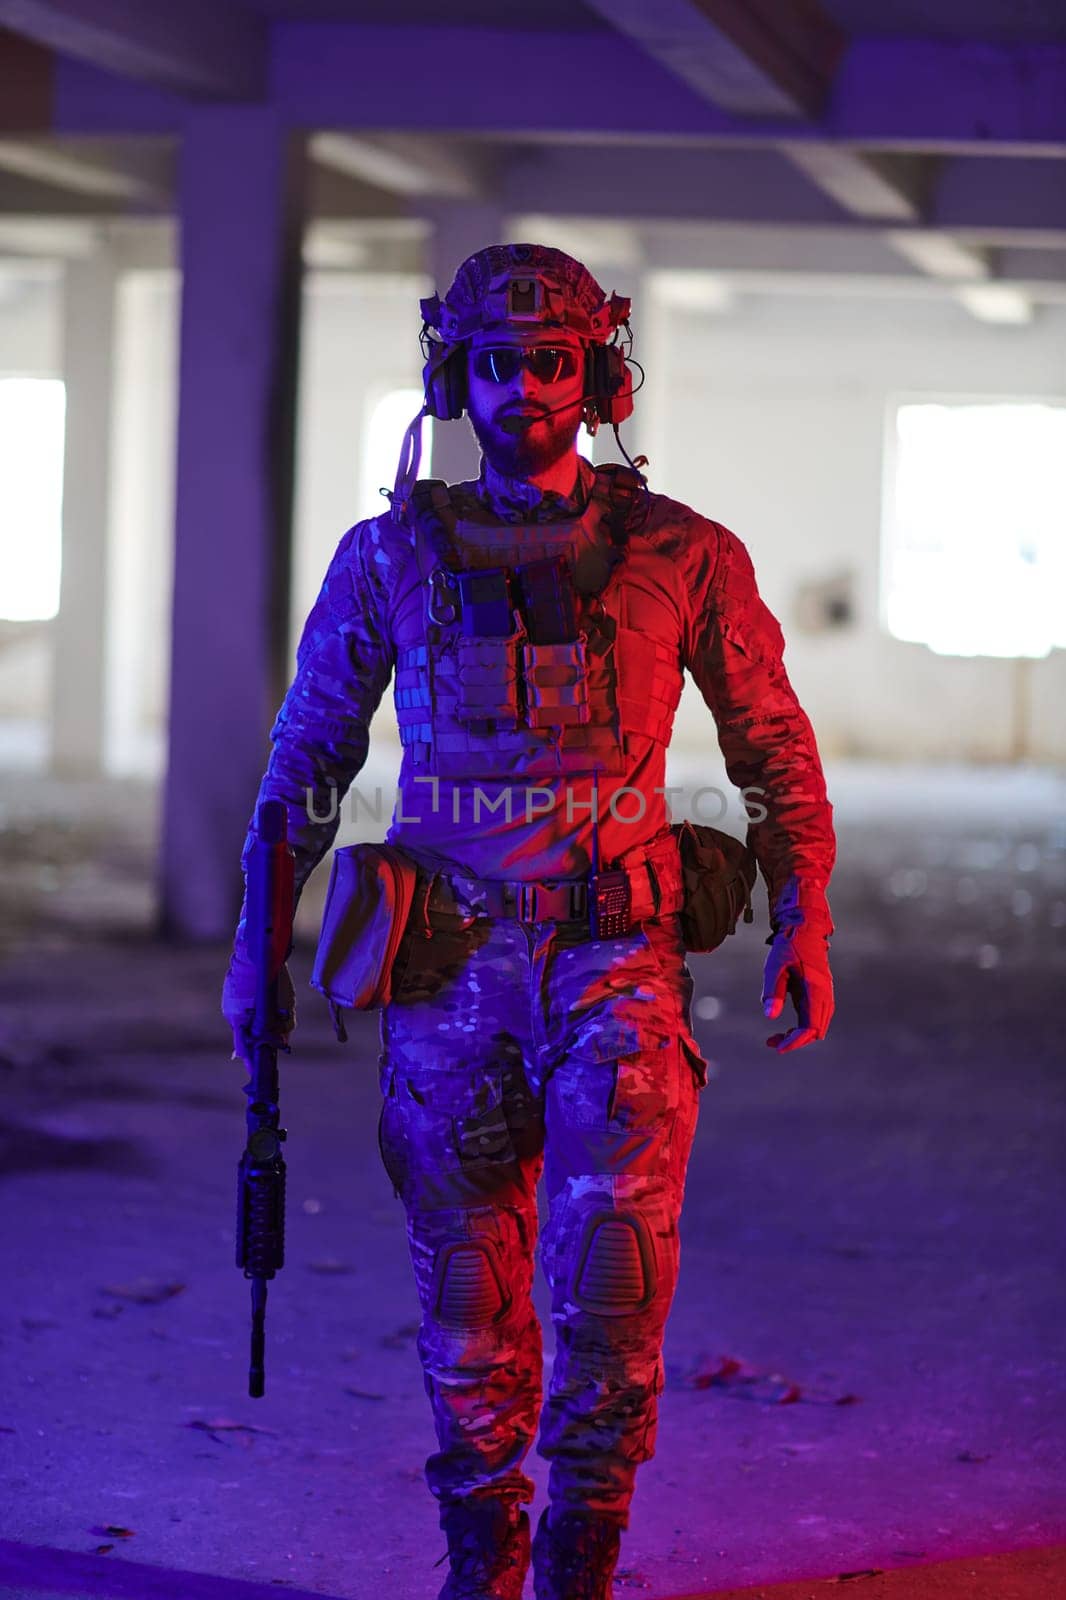 A professional soldier undertakes a perilous mission in an abandoned building illuminated by neon blue and purple lights.